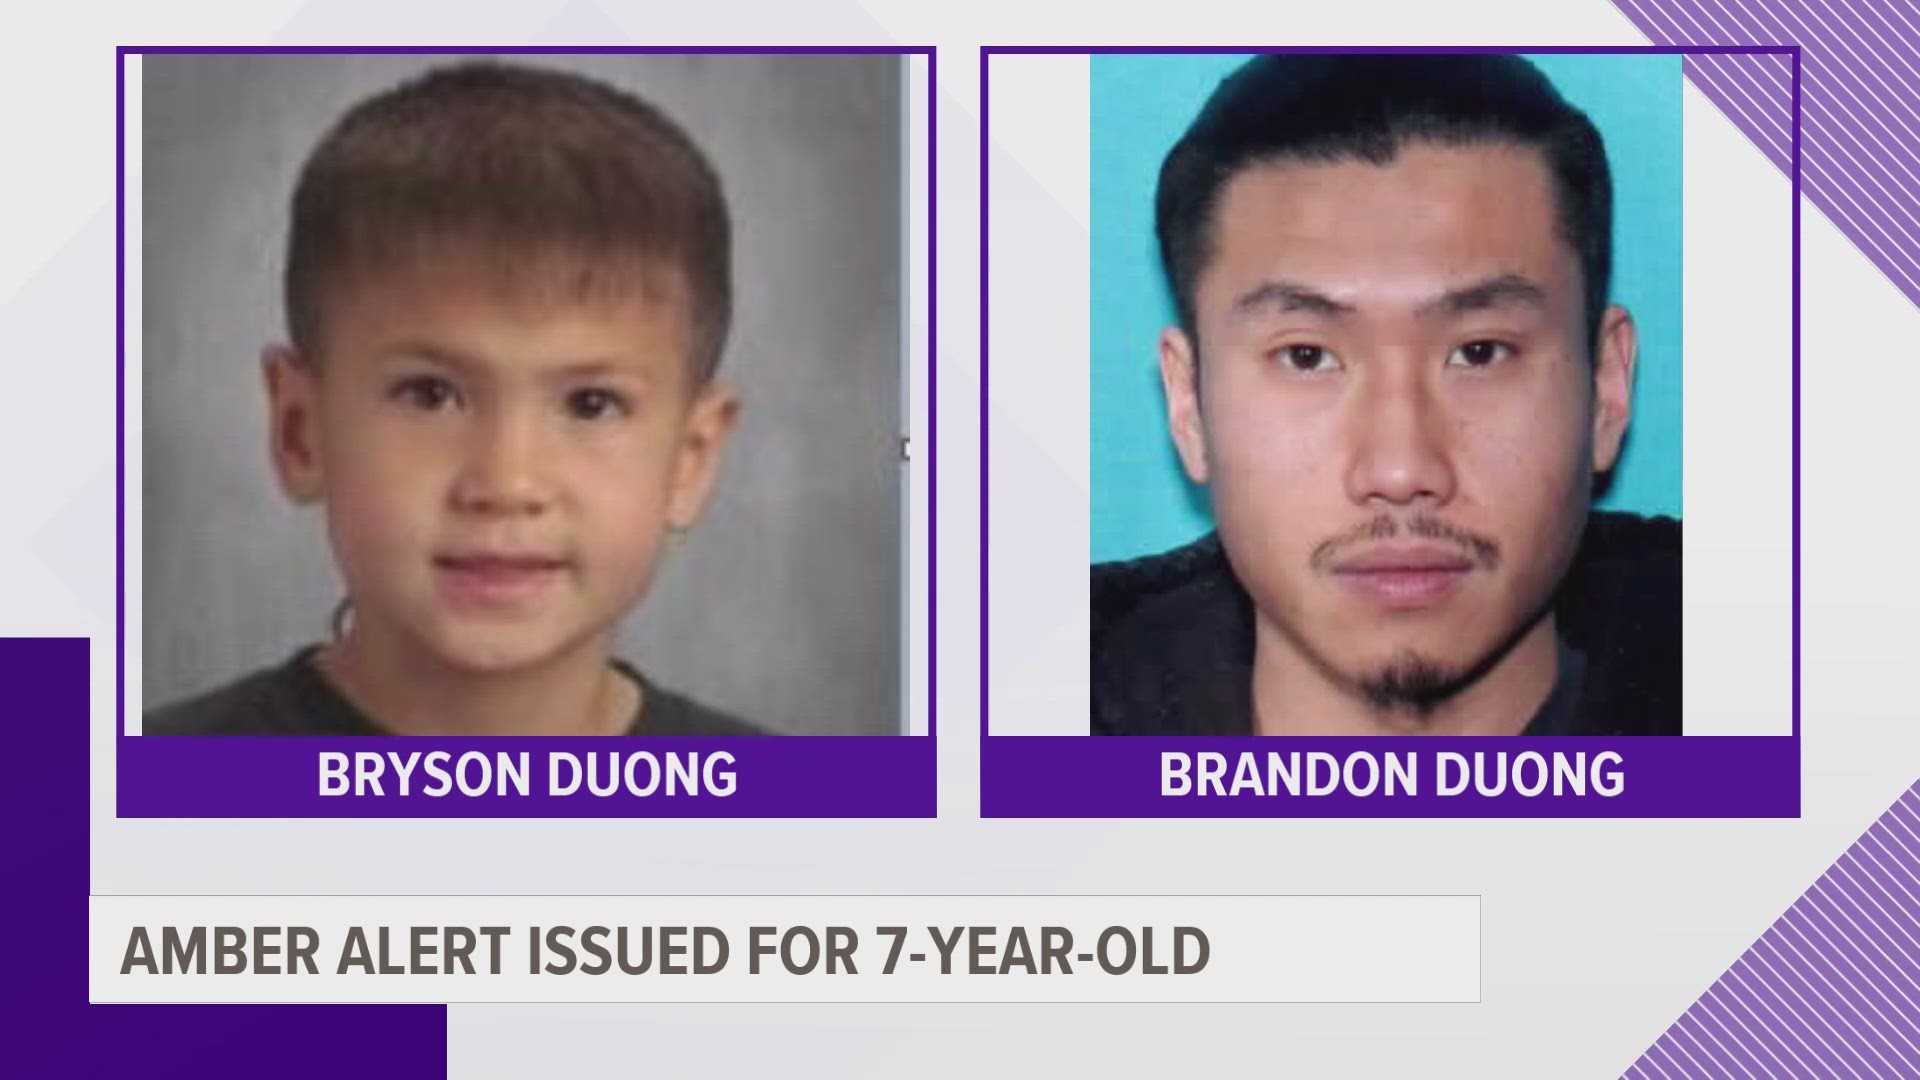 7-year-old Bryson Duong is believed to have been abducted by 34-year-old Brandon Duong.